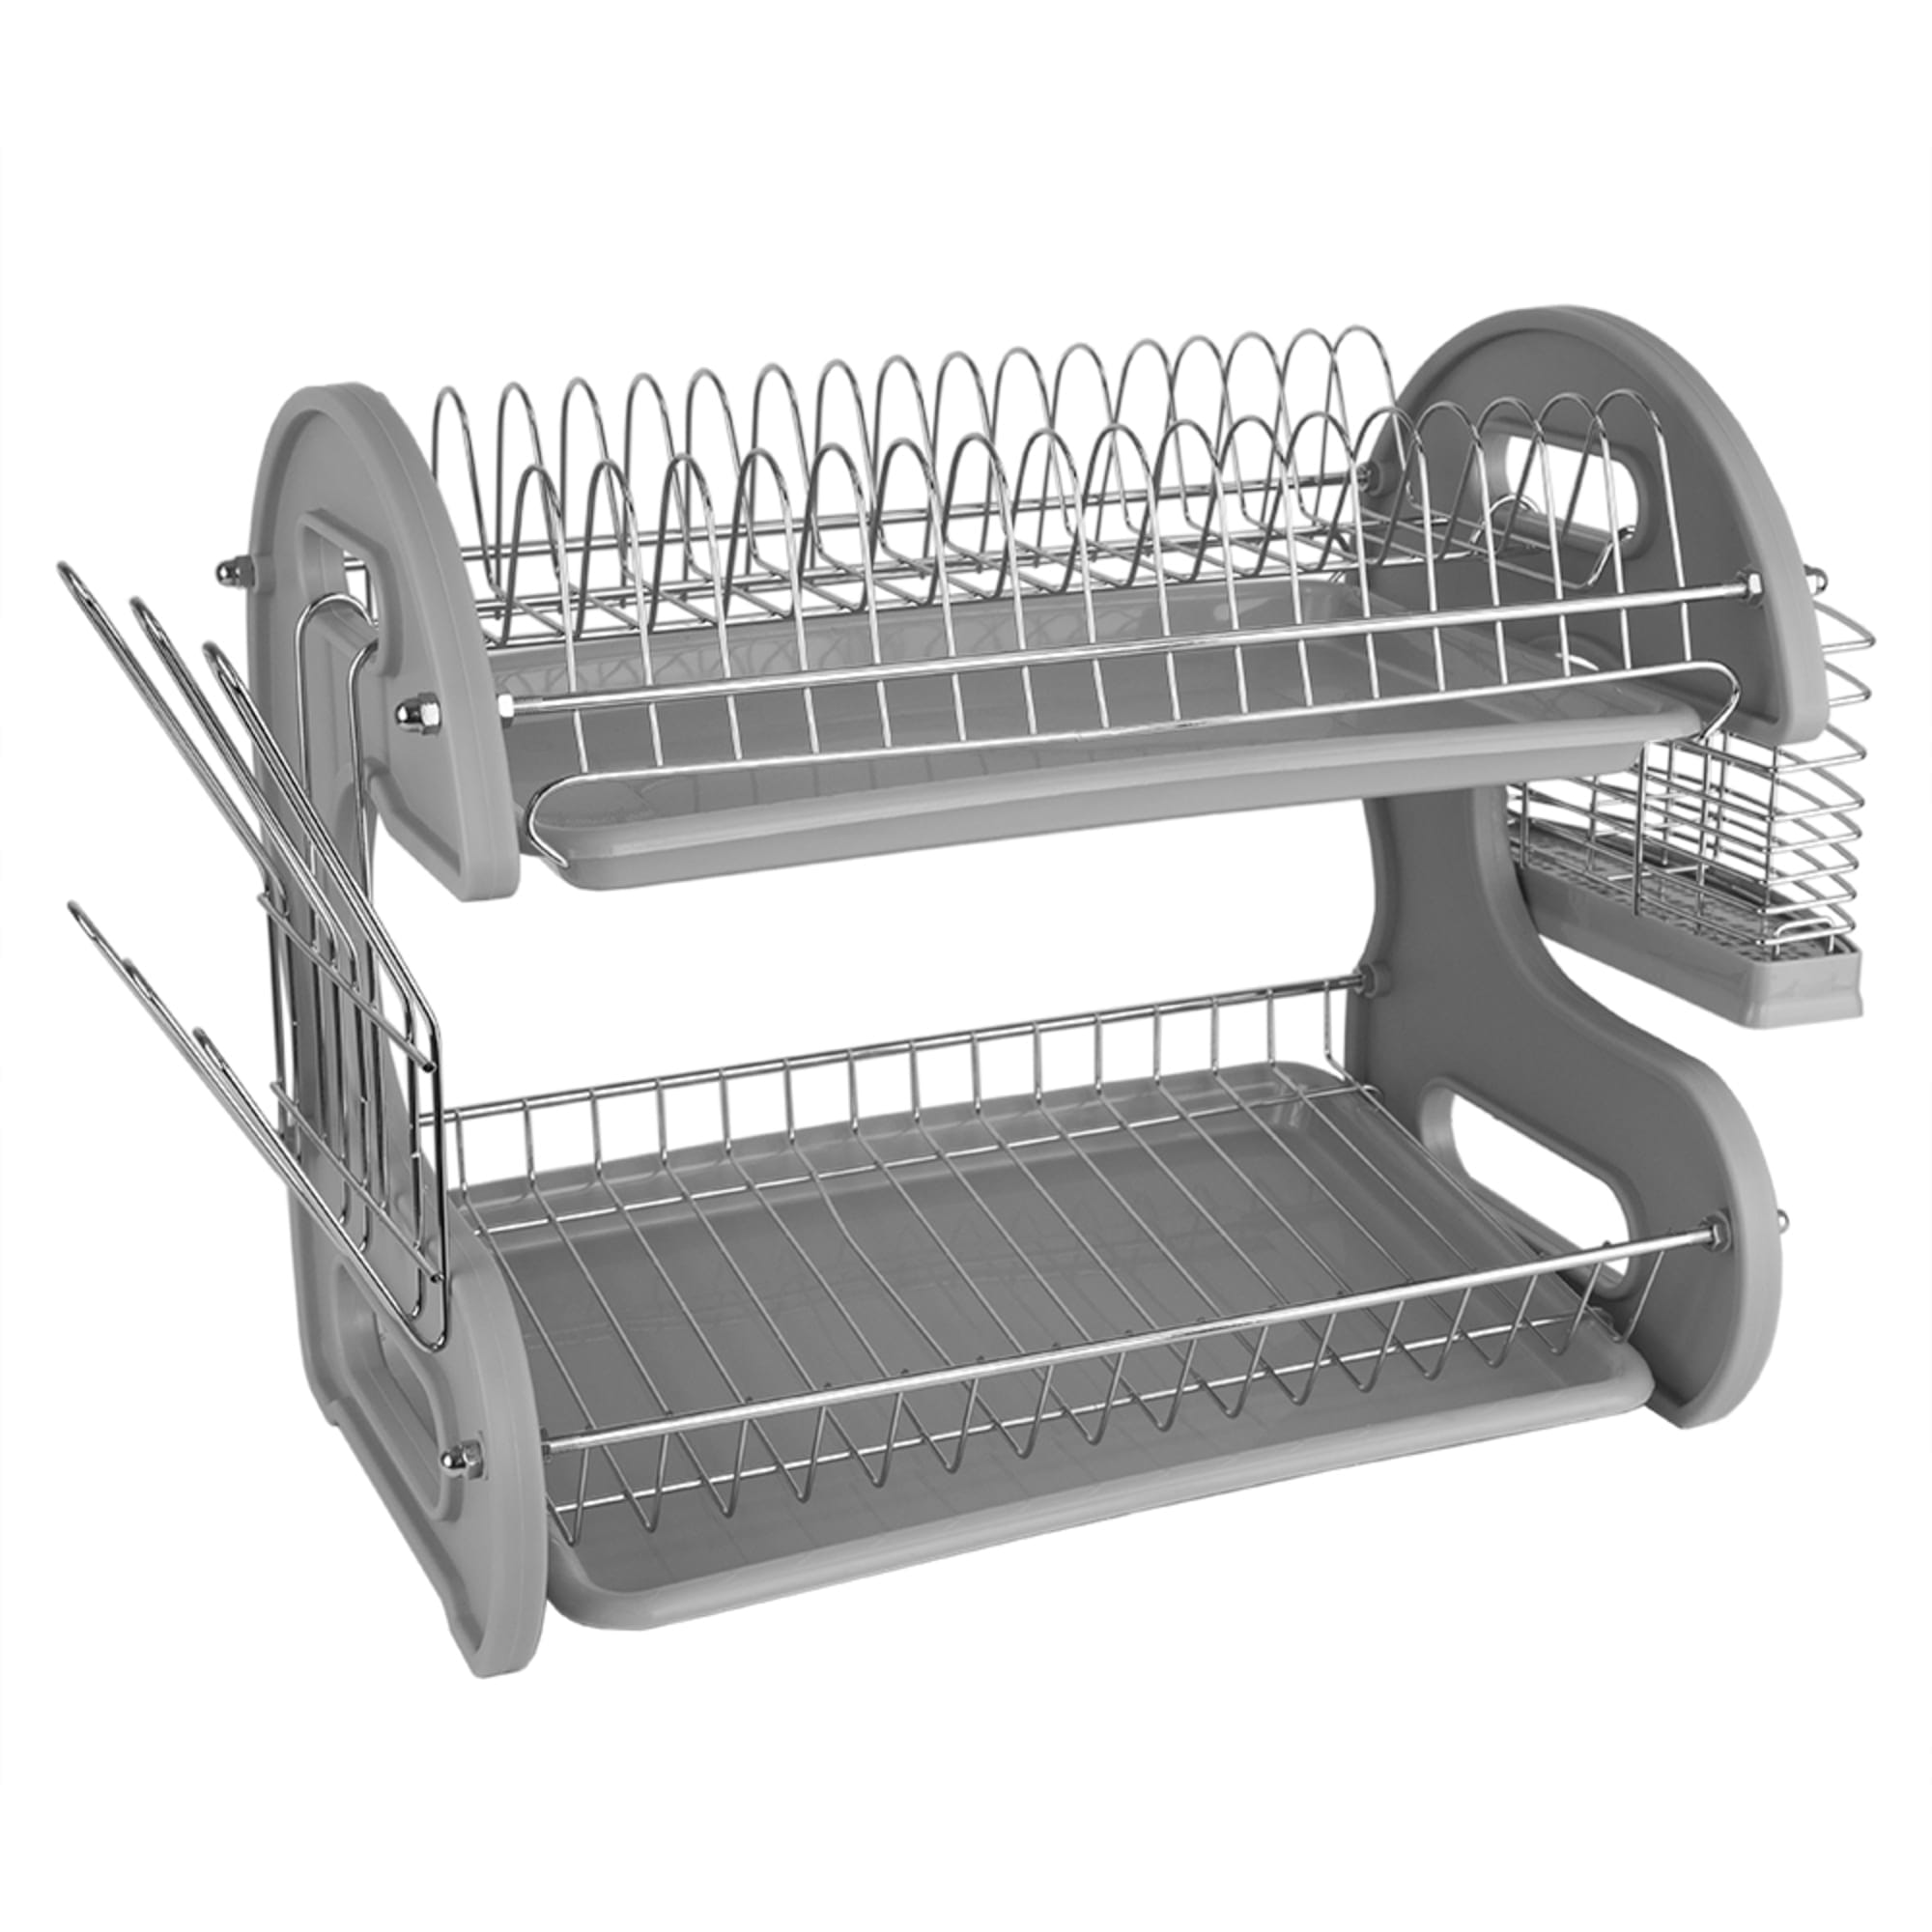 Home Basics S Shape  2 Tier Dish Drainer, Grey $20.00 EACH, CASE PACK OF 6